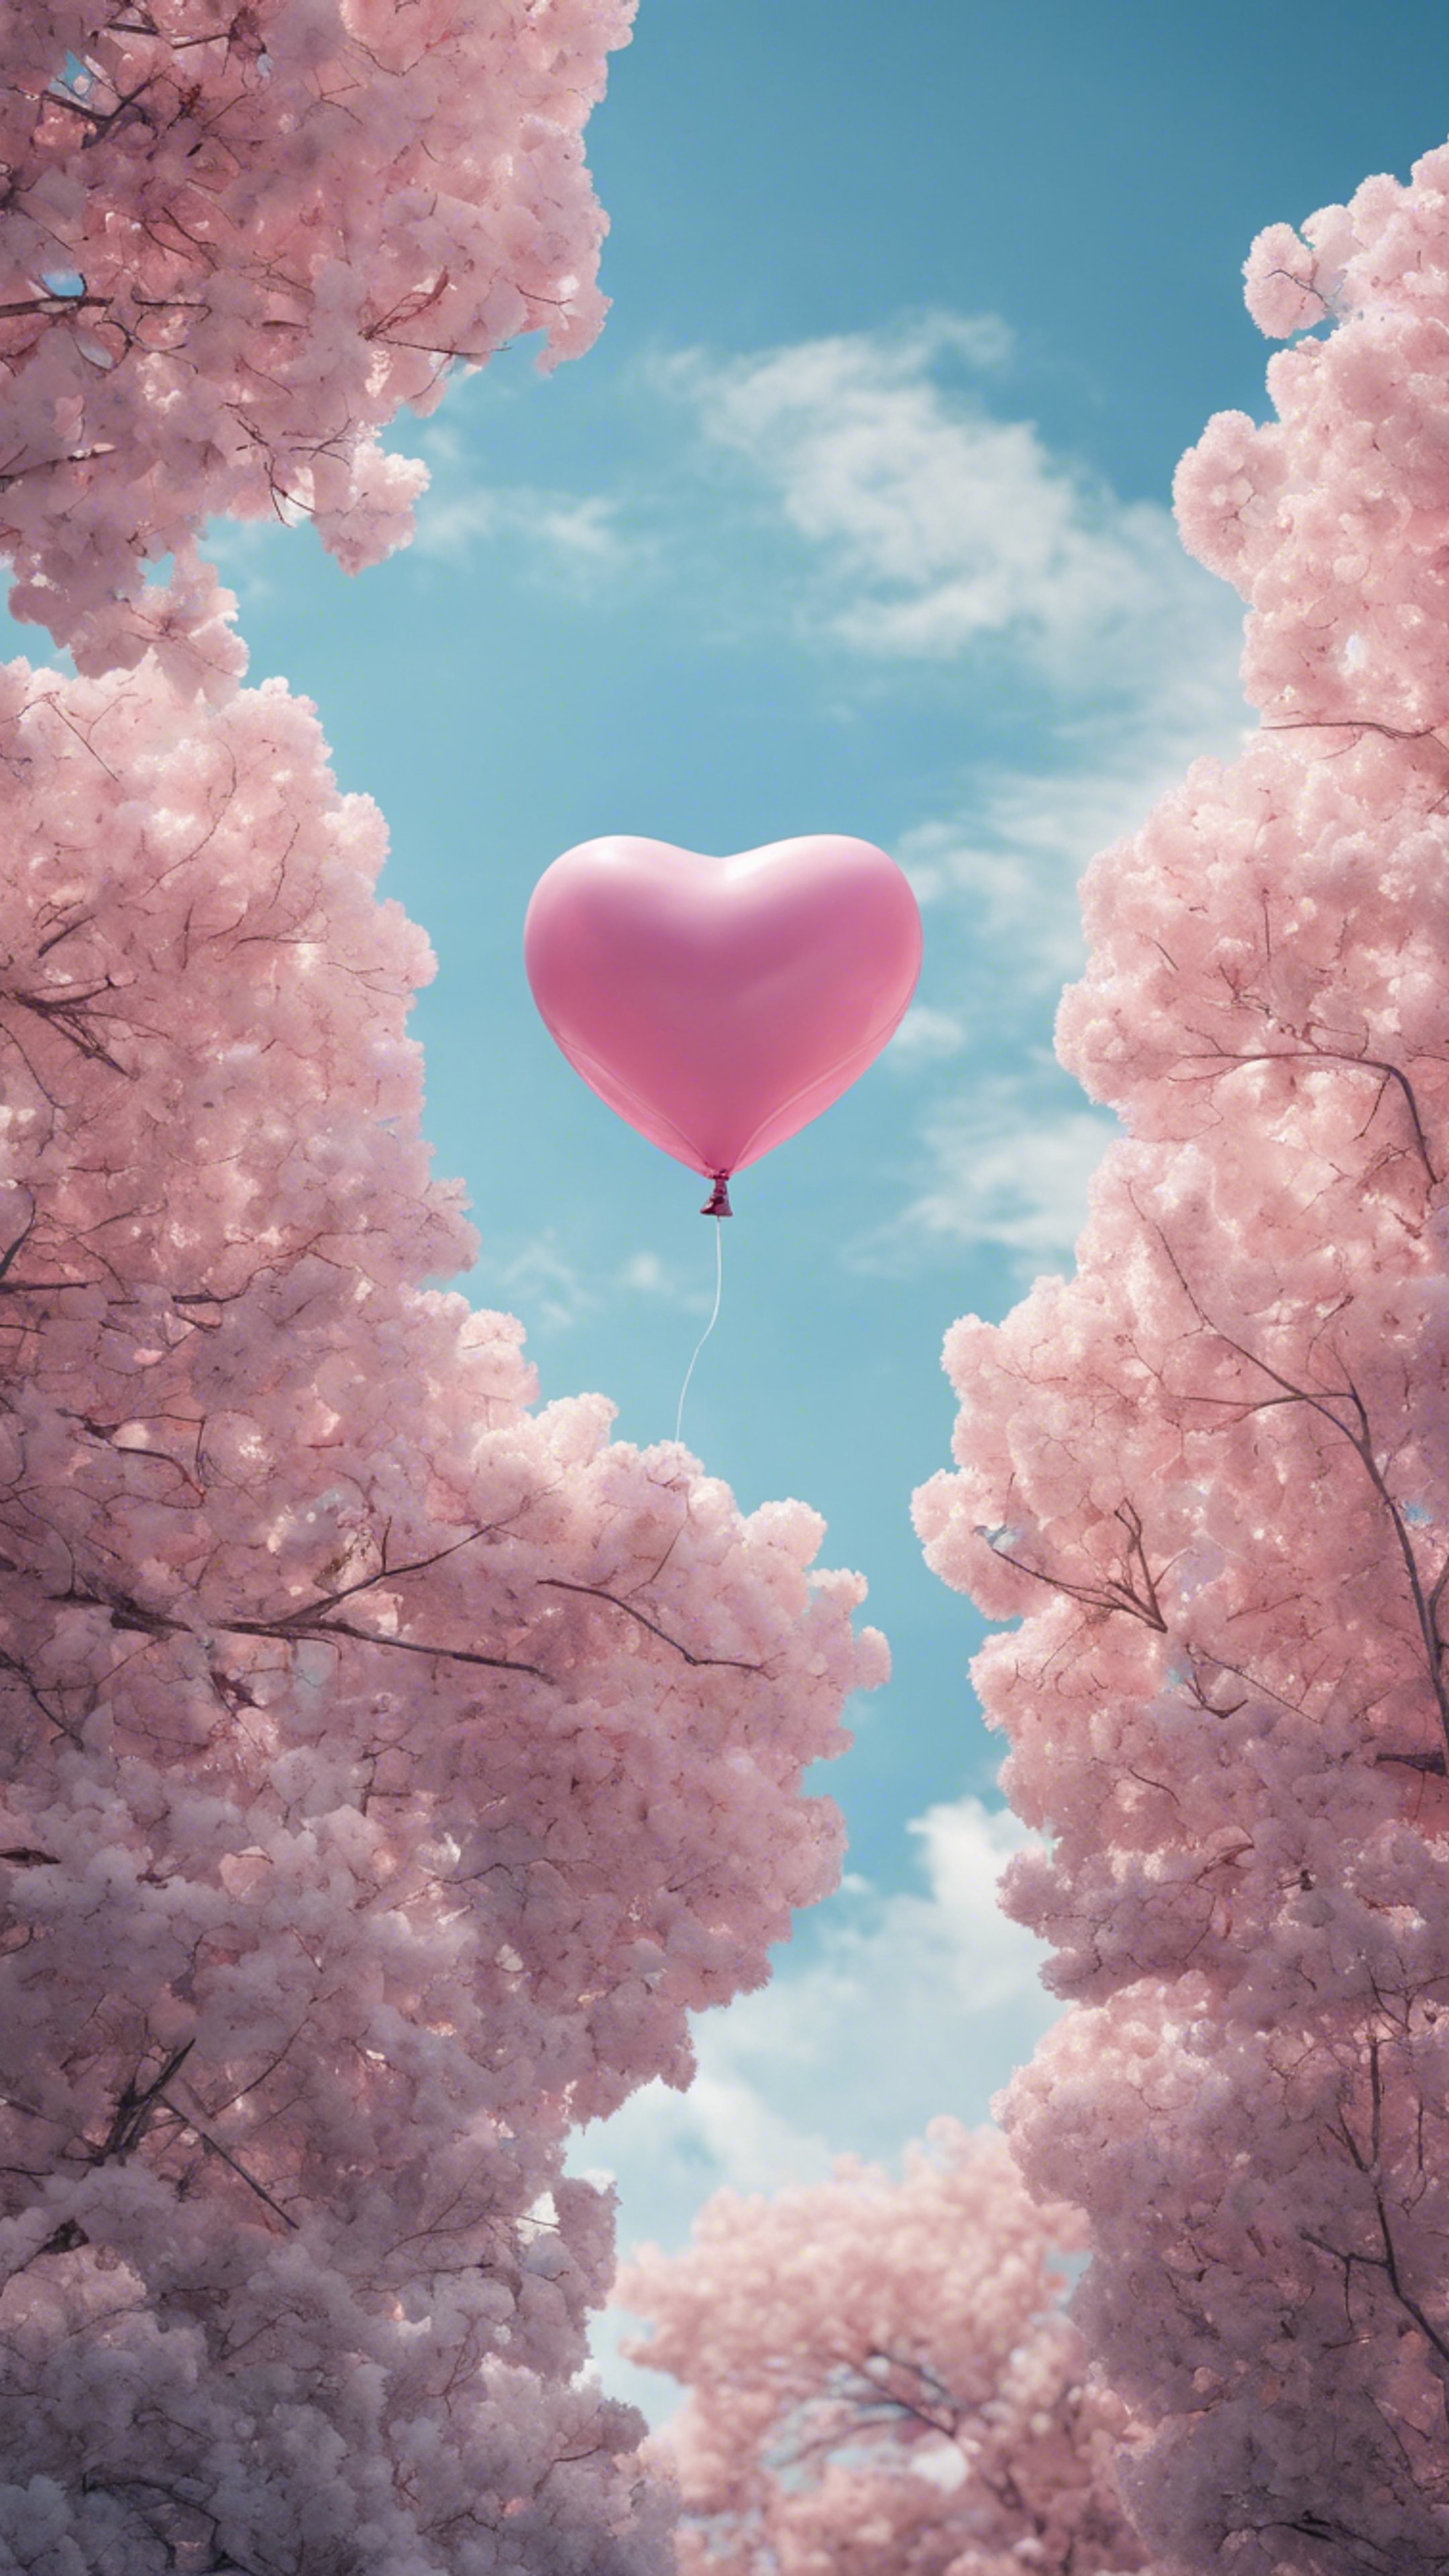 A pink heart-shaped balloon floating in the blue sky. Валлпапер[cd7c71404dc64bc7bb7c]